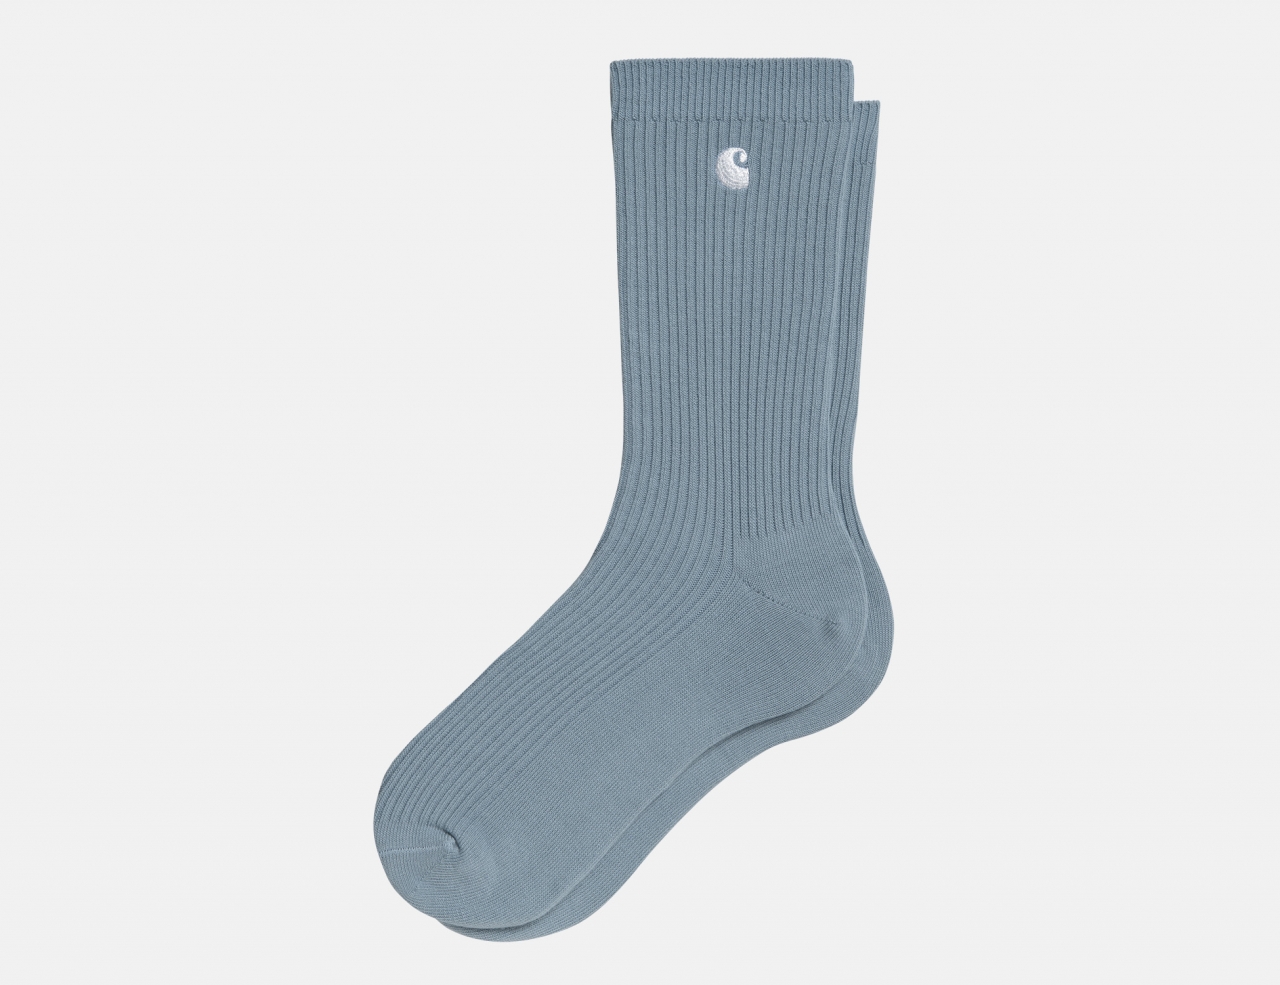 Carhartt WIP Madison Socks Pack - Frosted Blue / White